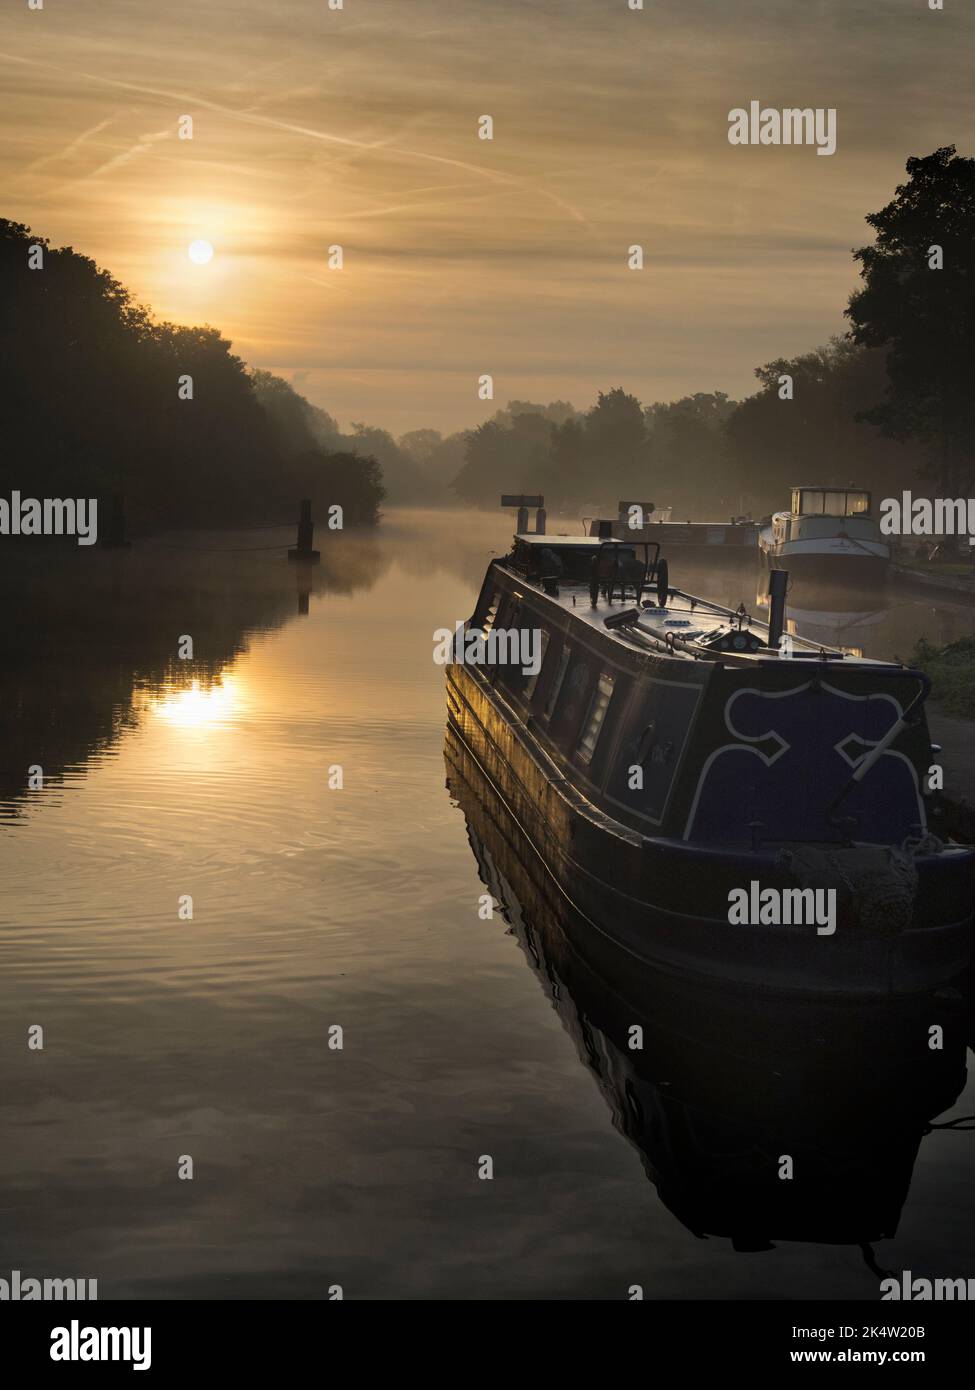 Abingdon-on-Thames claims to be the oldest town in England. And the River Thames runs through its heart. In this idyllic scene, we see a quite beautif Stock Photo